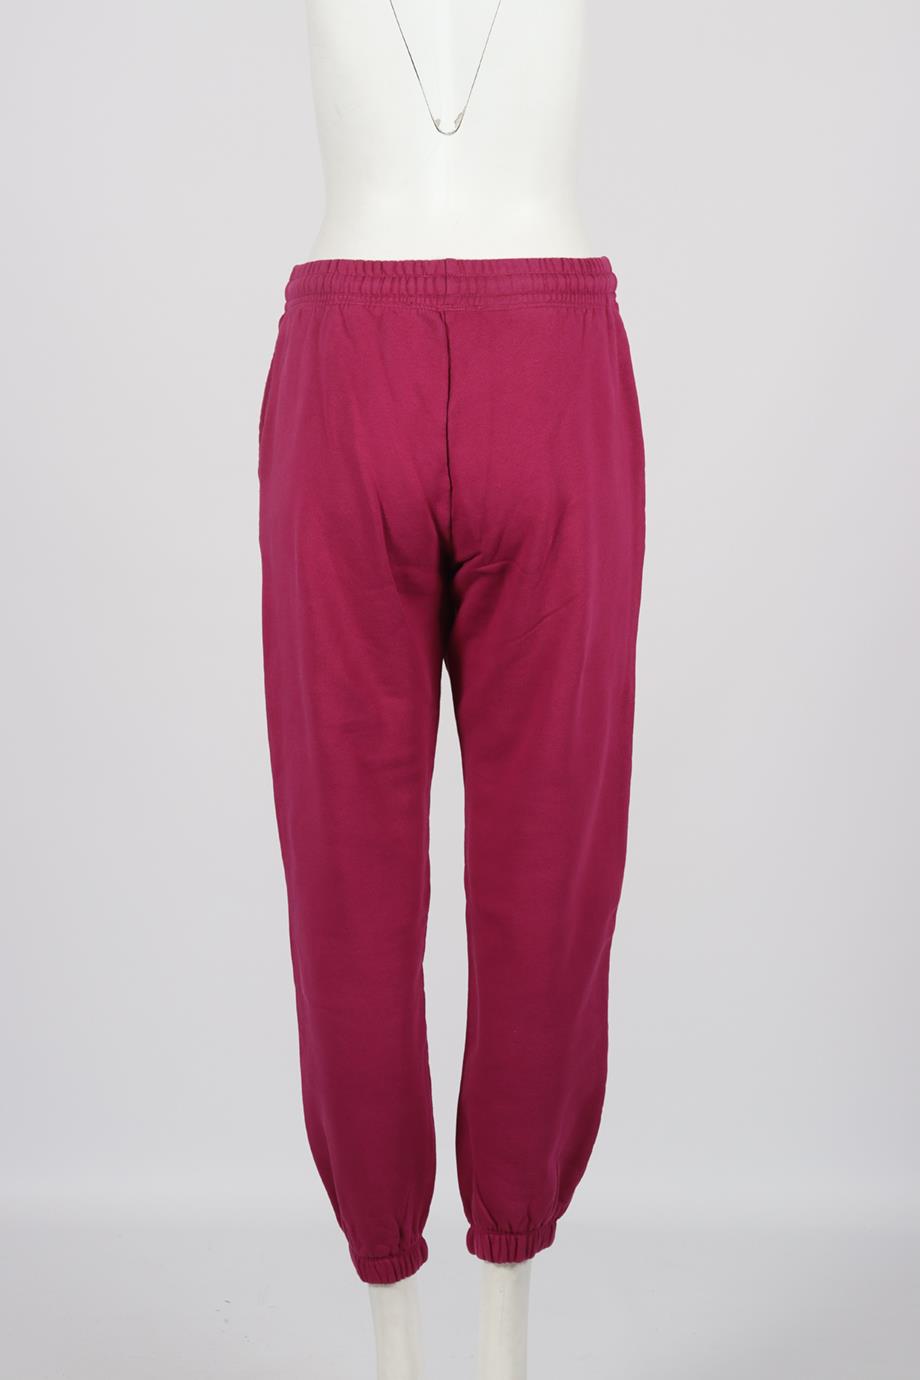 ROTATE BIRGER CHRISTENSEN EMBROIDERED COTTON JERSEY TRACK PANTS SMALL